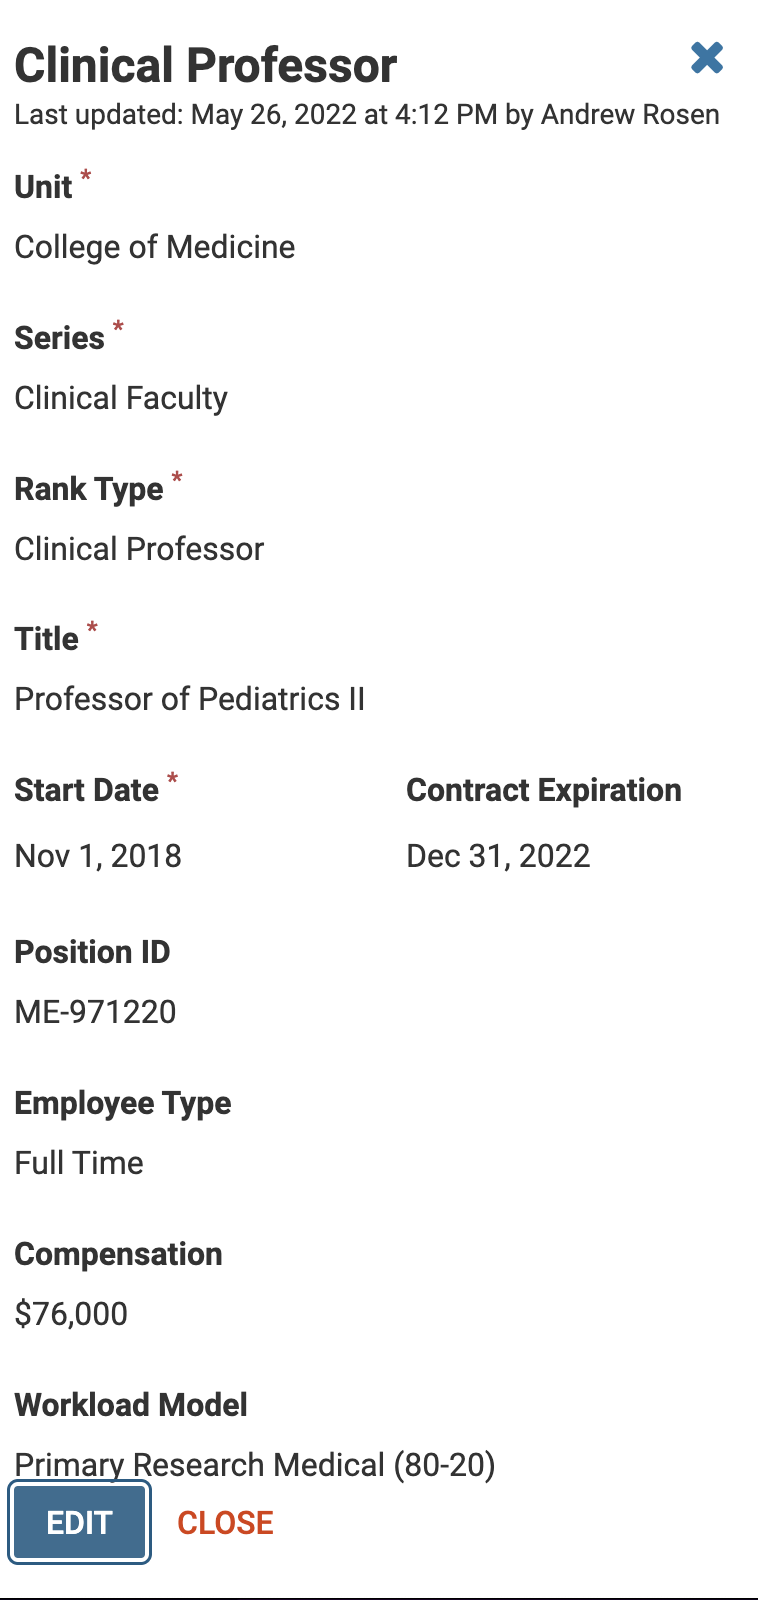 Edit button selected at the bottom of the Clinical Professor information